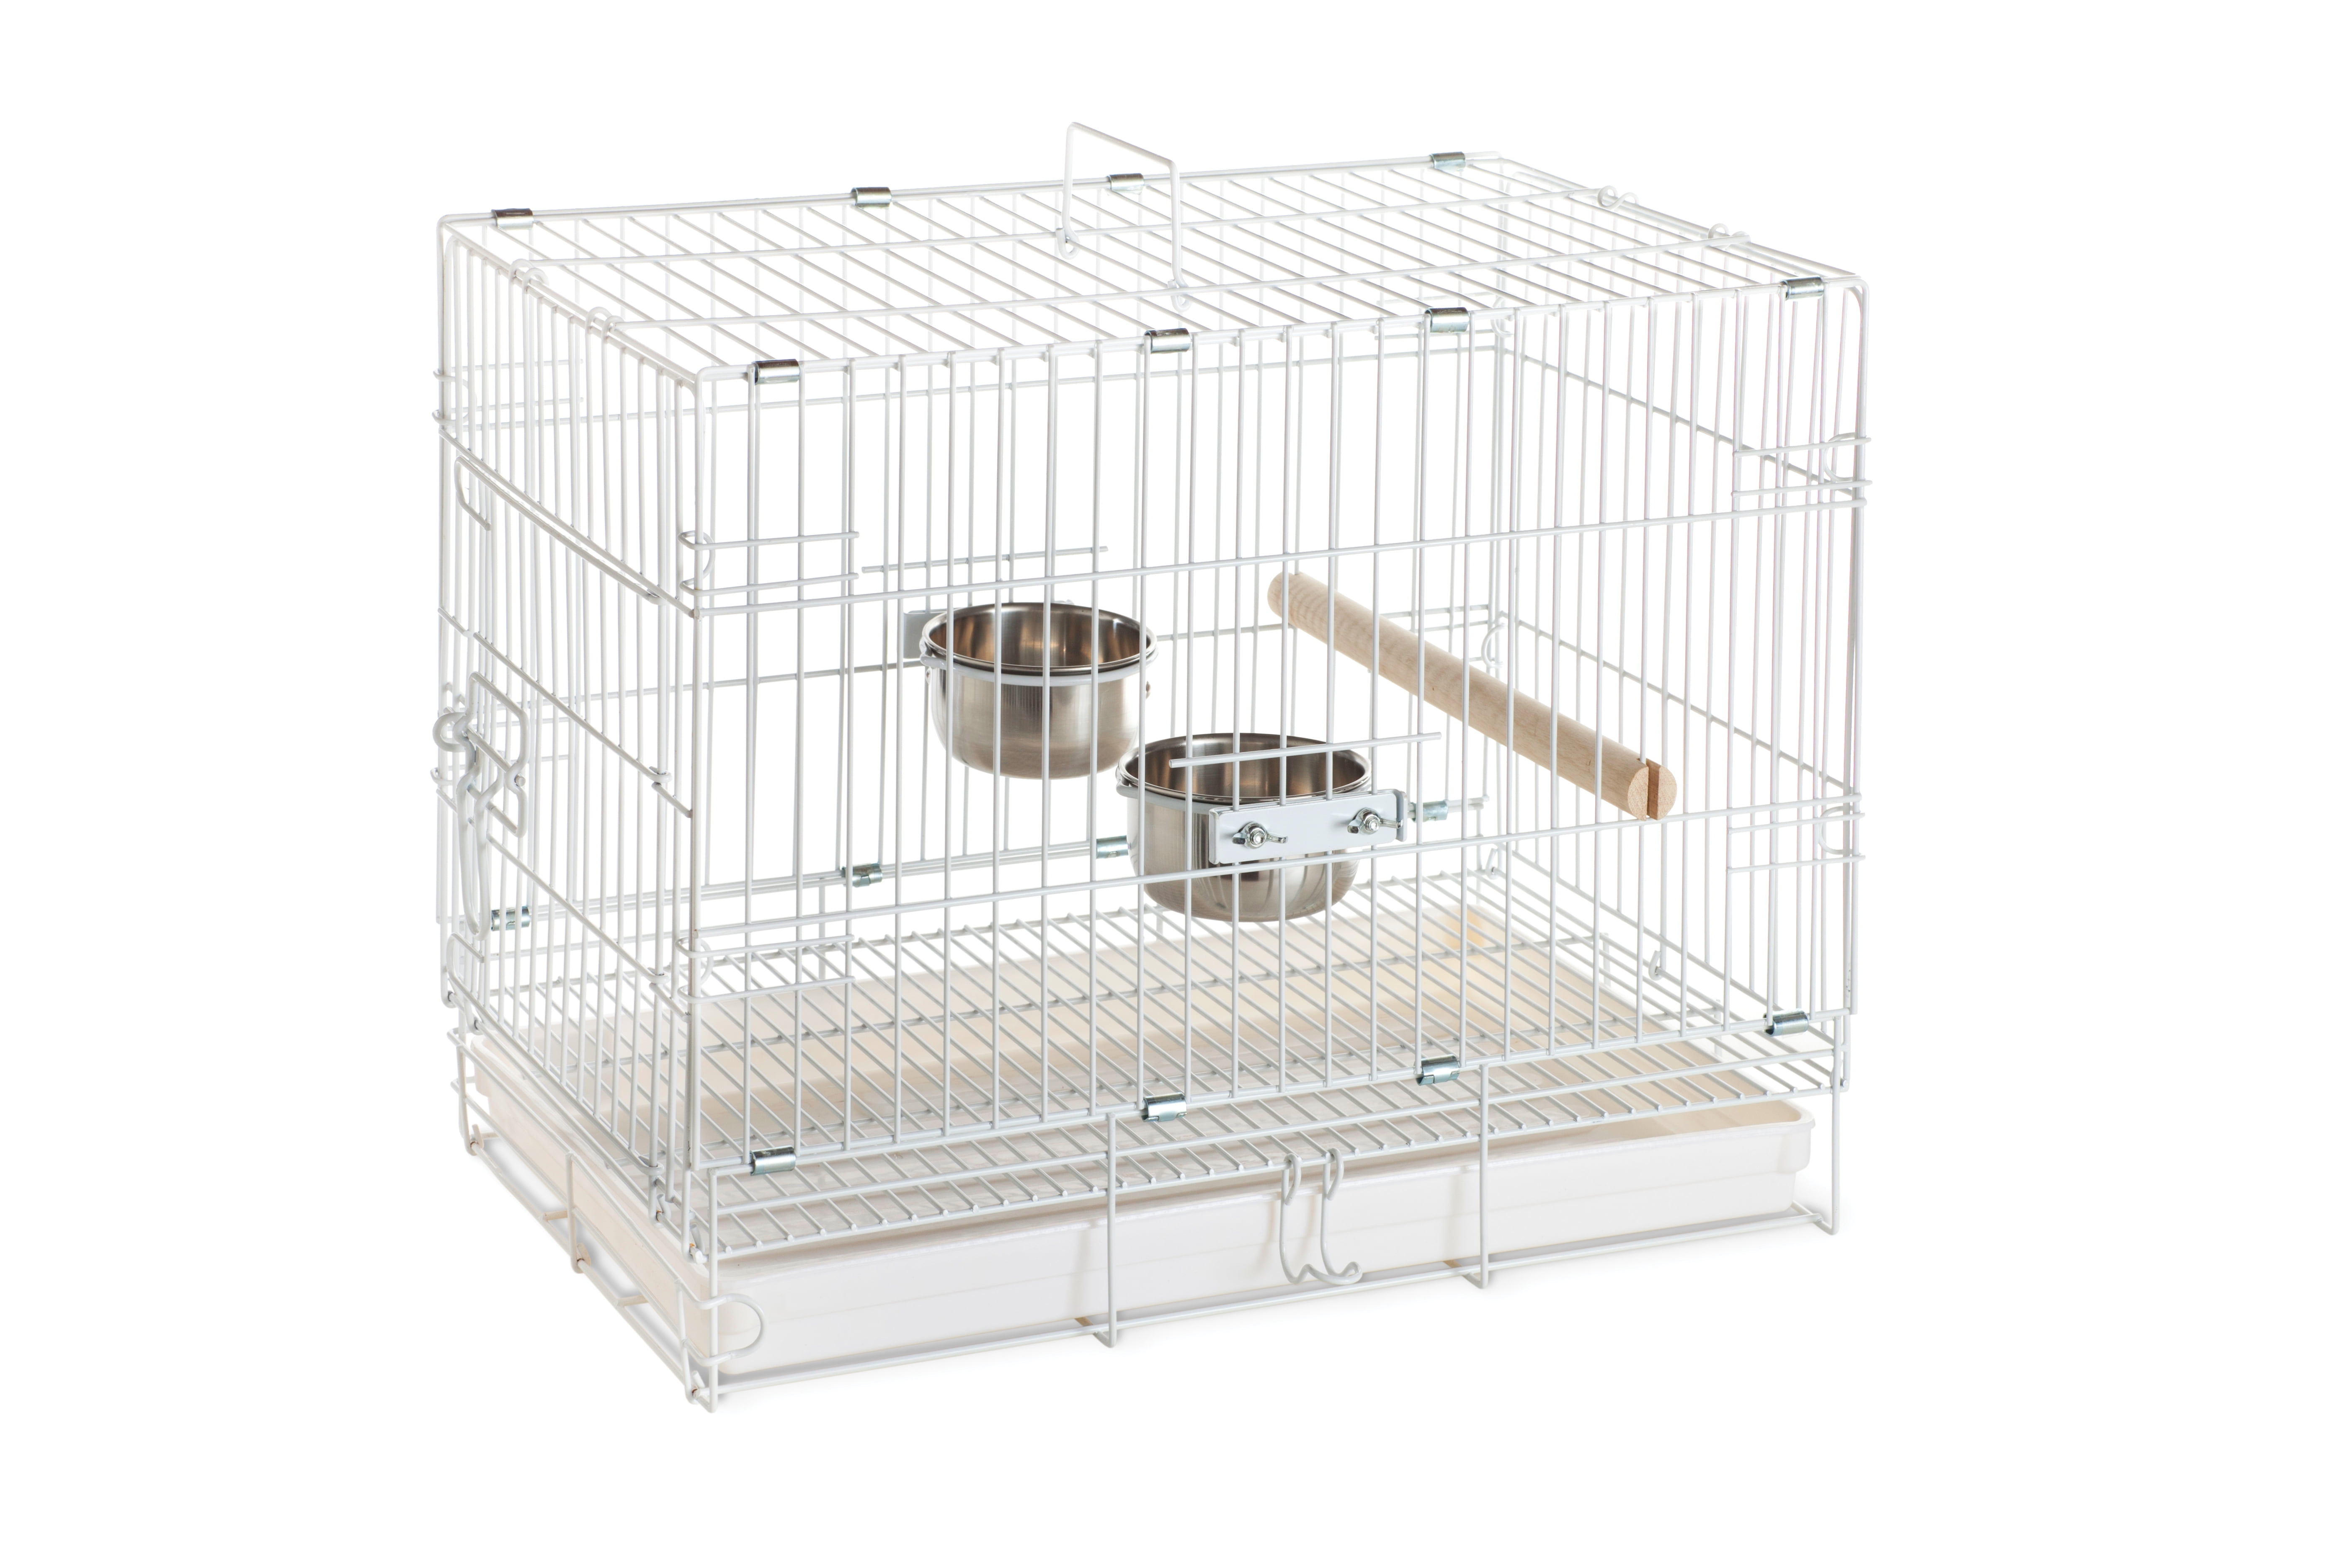 Canary Pet Ting Bird Transport Cage XL Bird Travel Cage Finch Budgie Etc